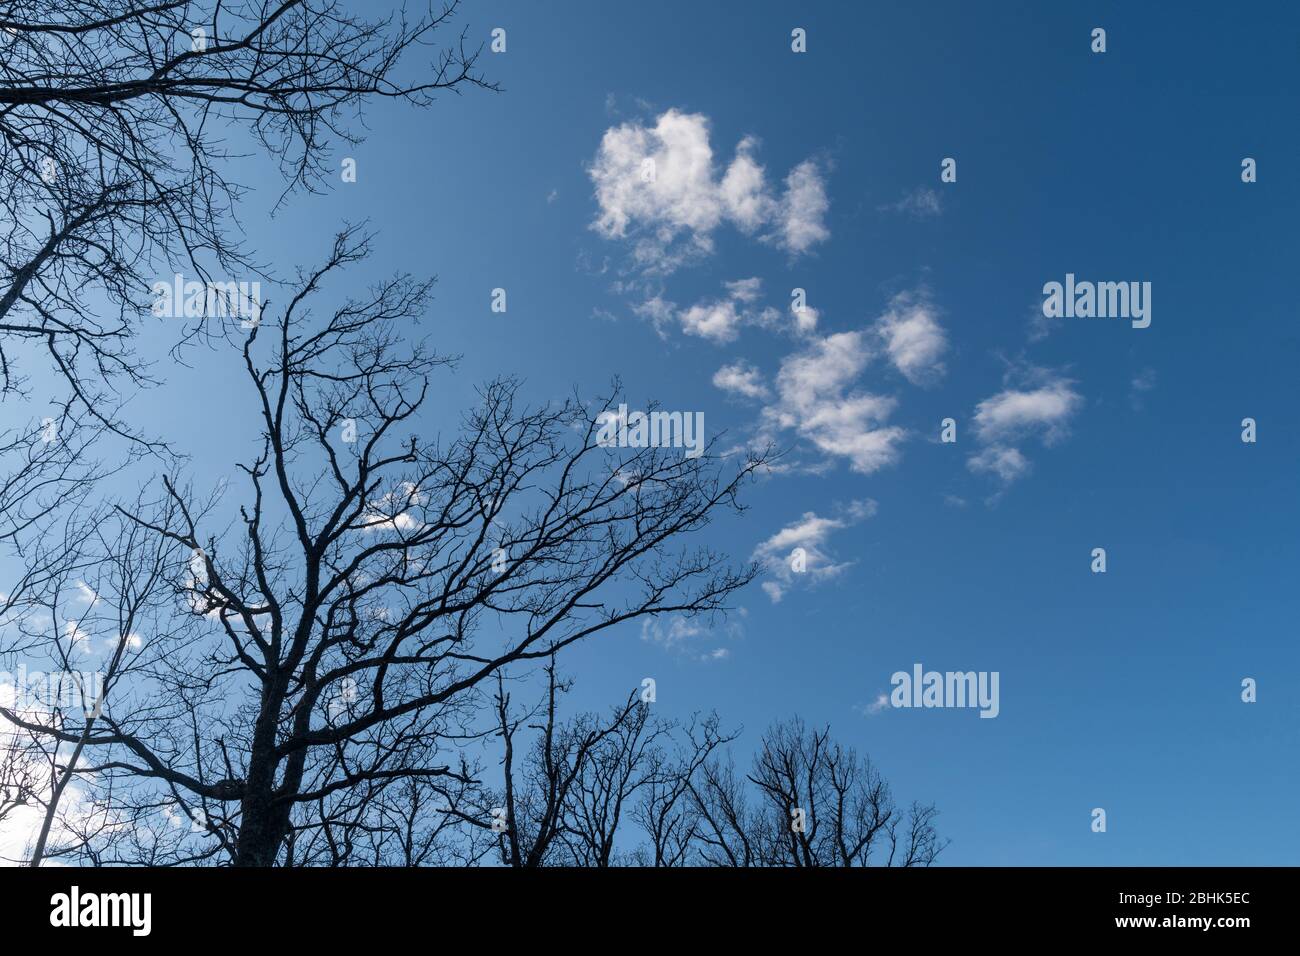 Bare oak tree tops silhouettes by blue skies Stock Photo